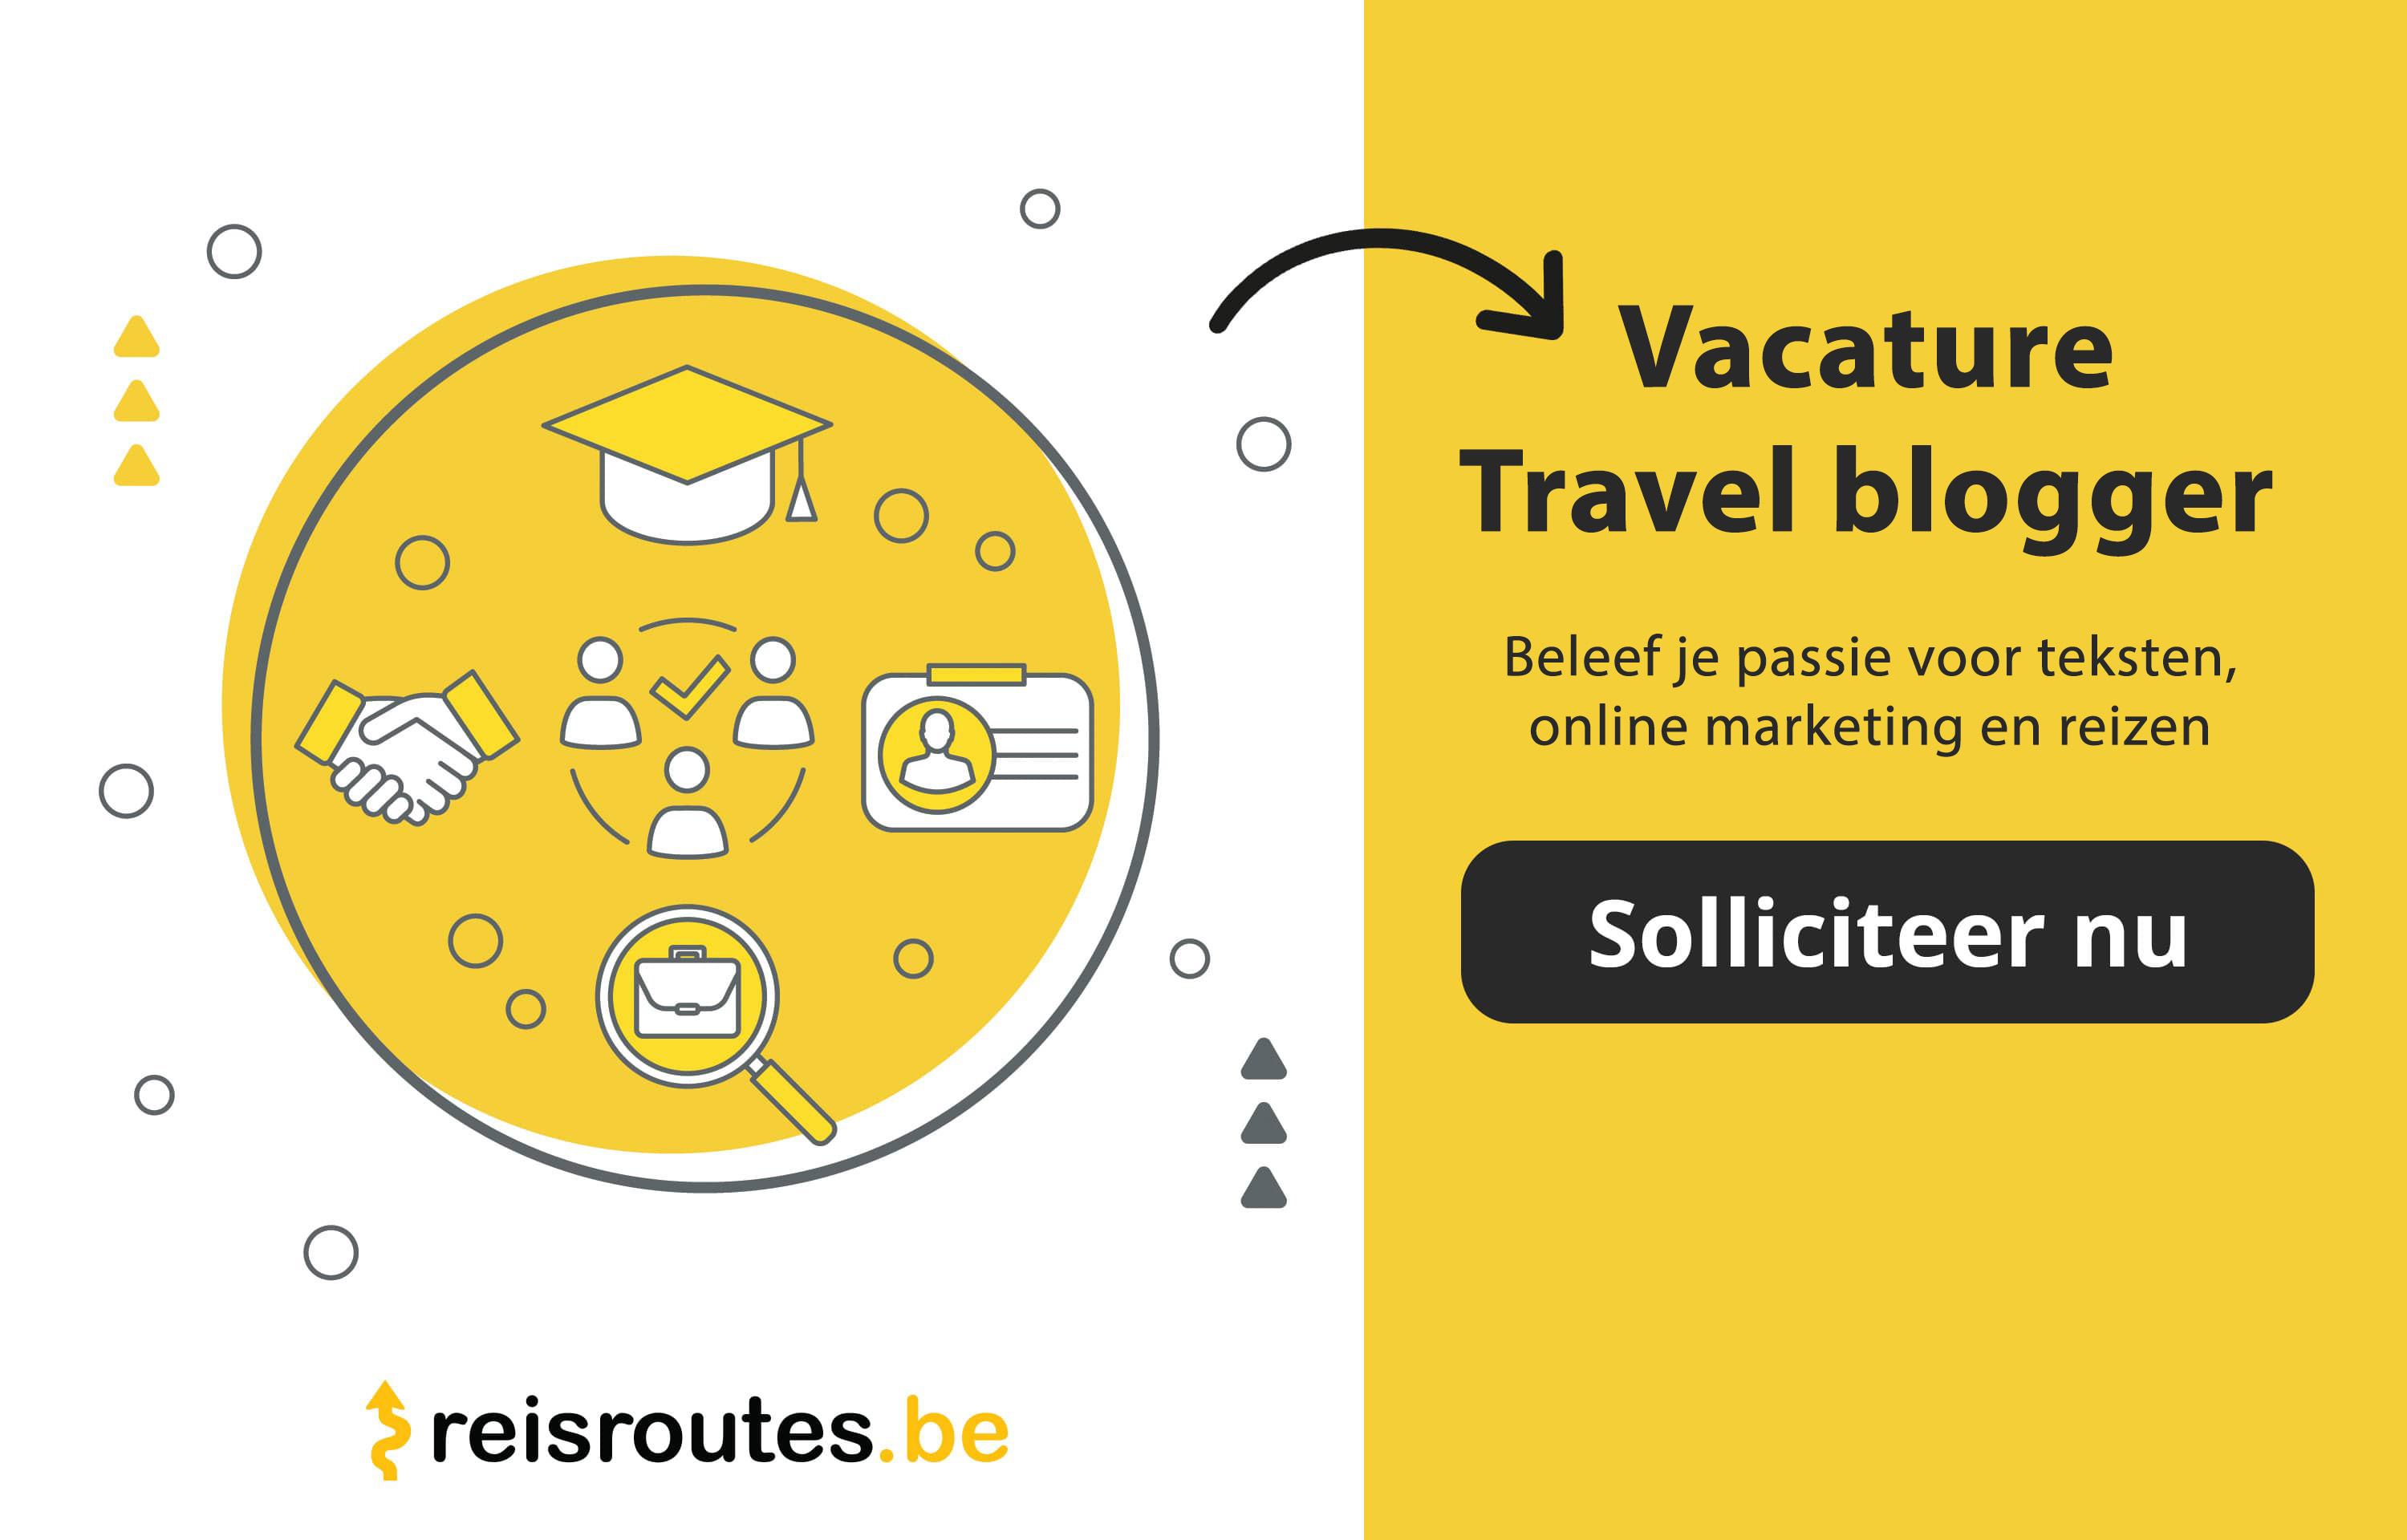 Vacature Full-time Travel blogger / Content creator